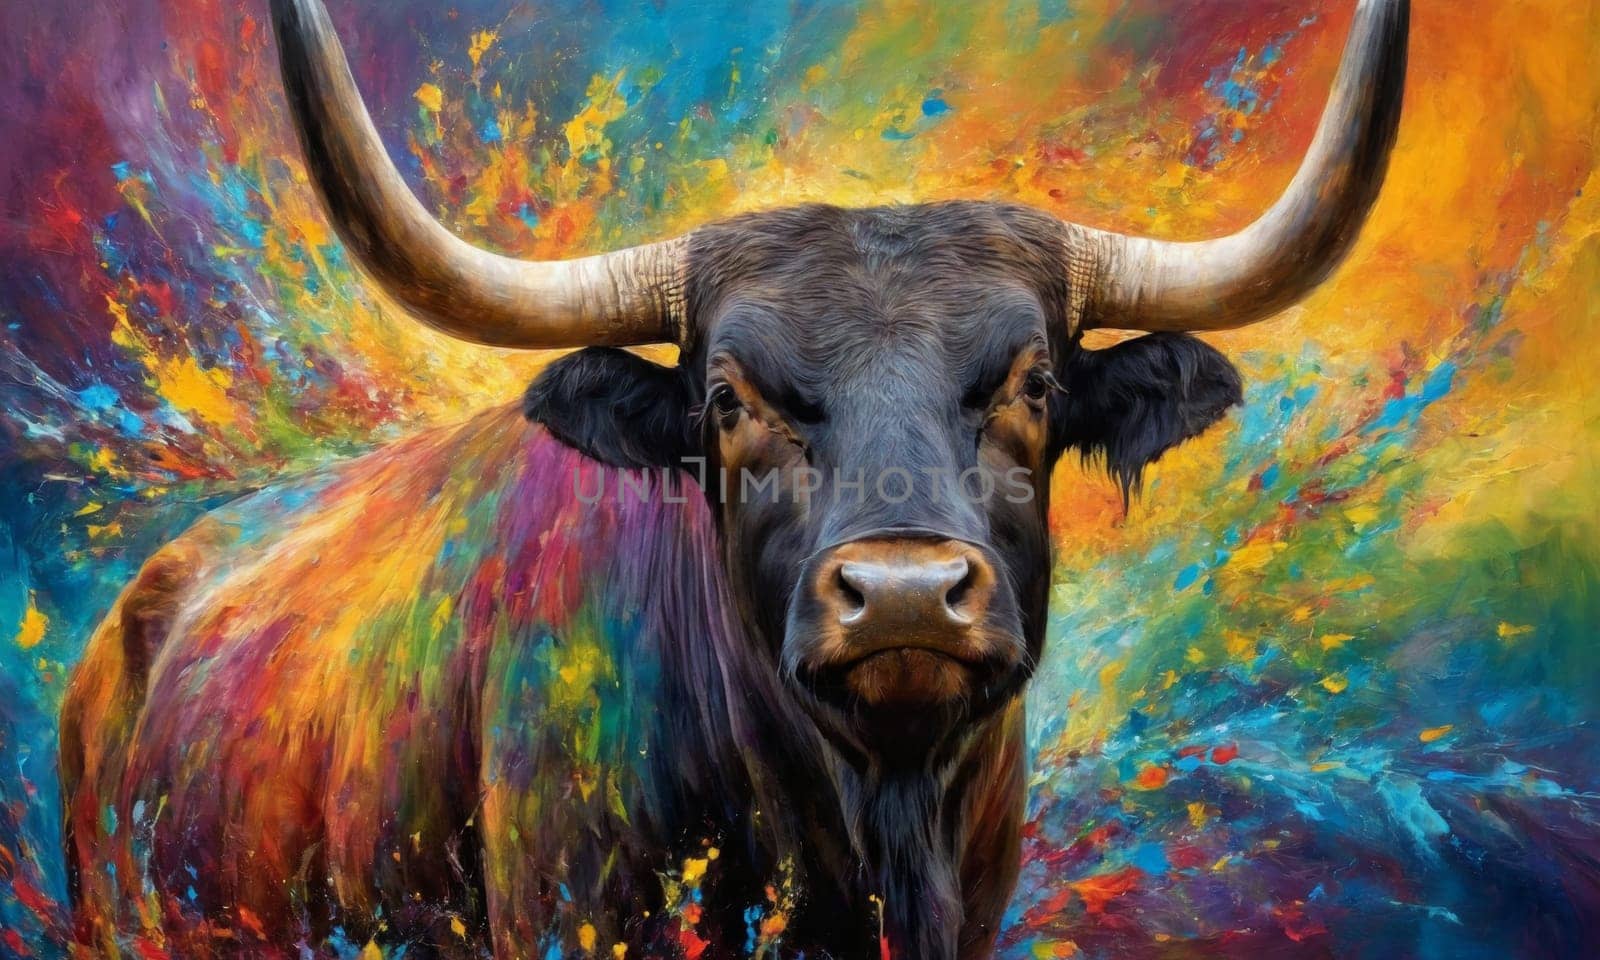 Portrait of a black bull on a multicolored background. Digital painting.